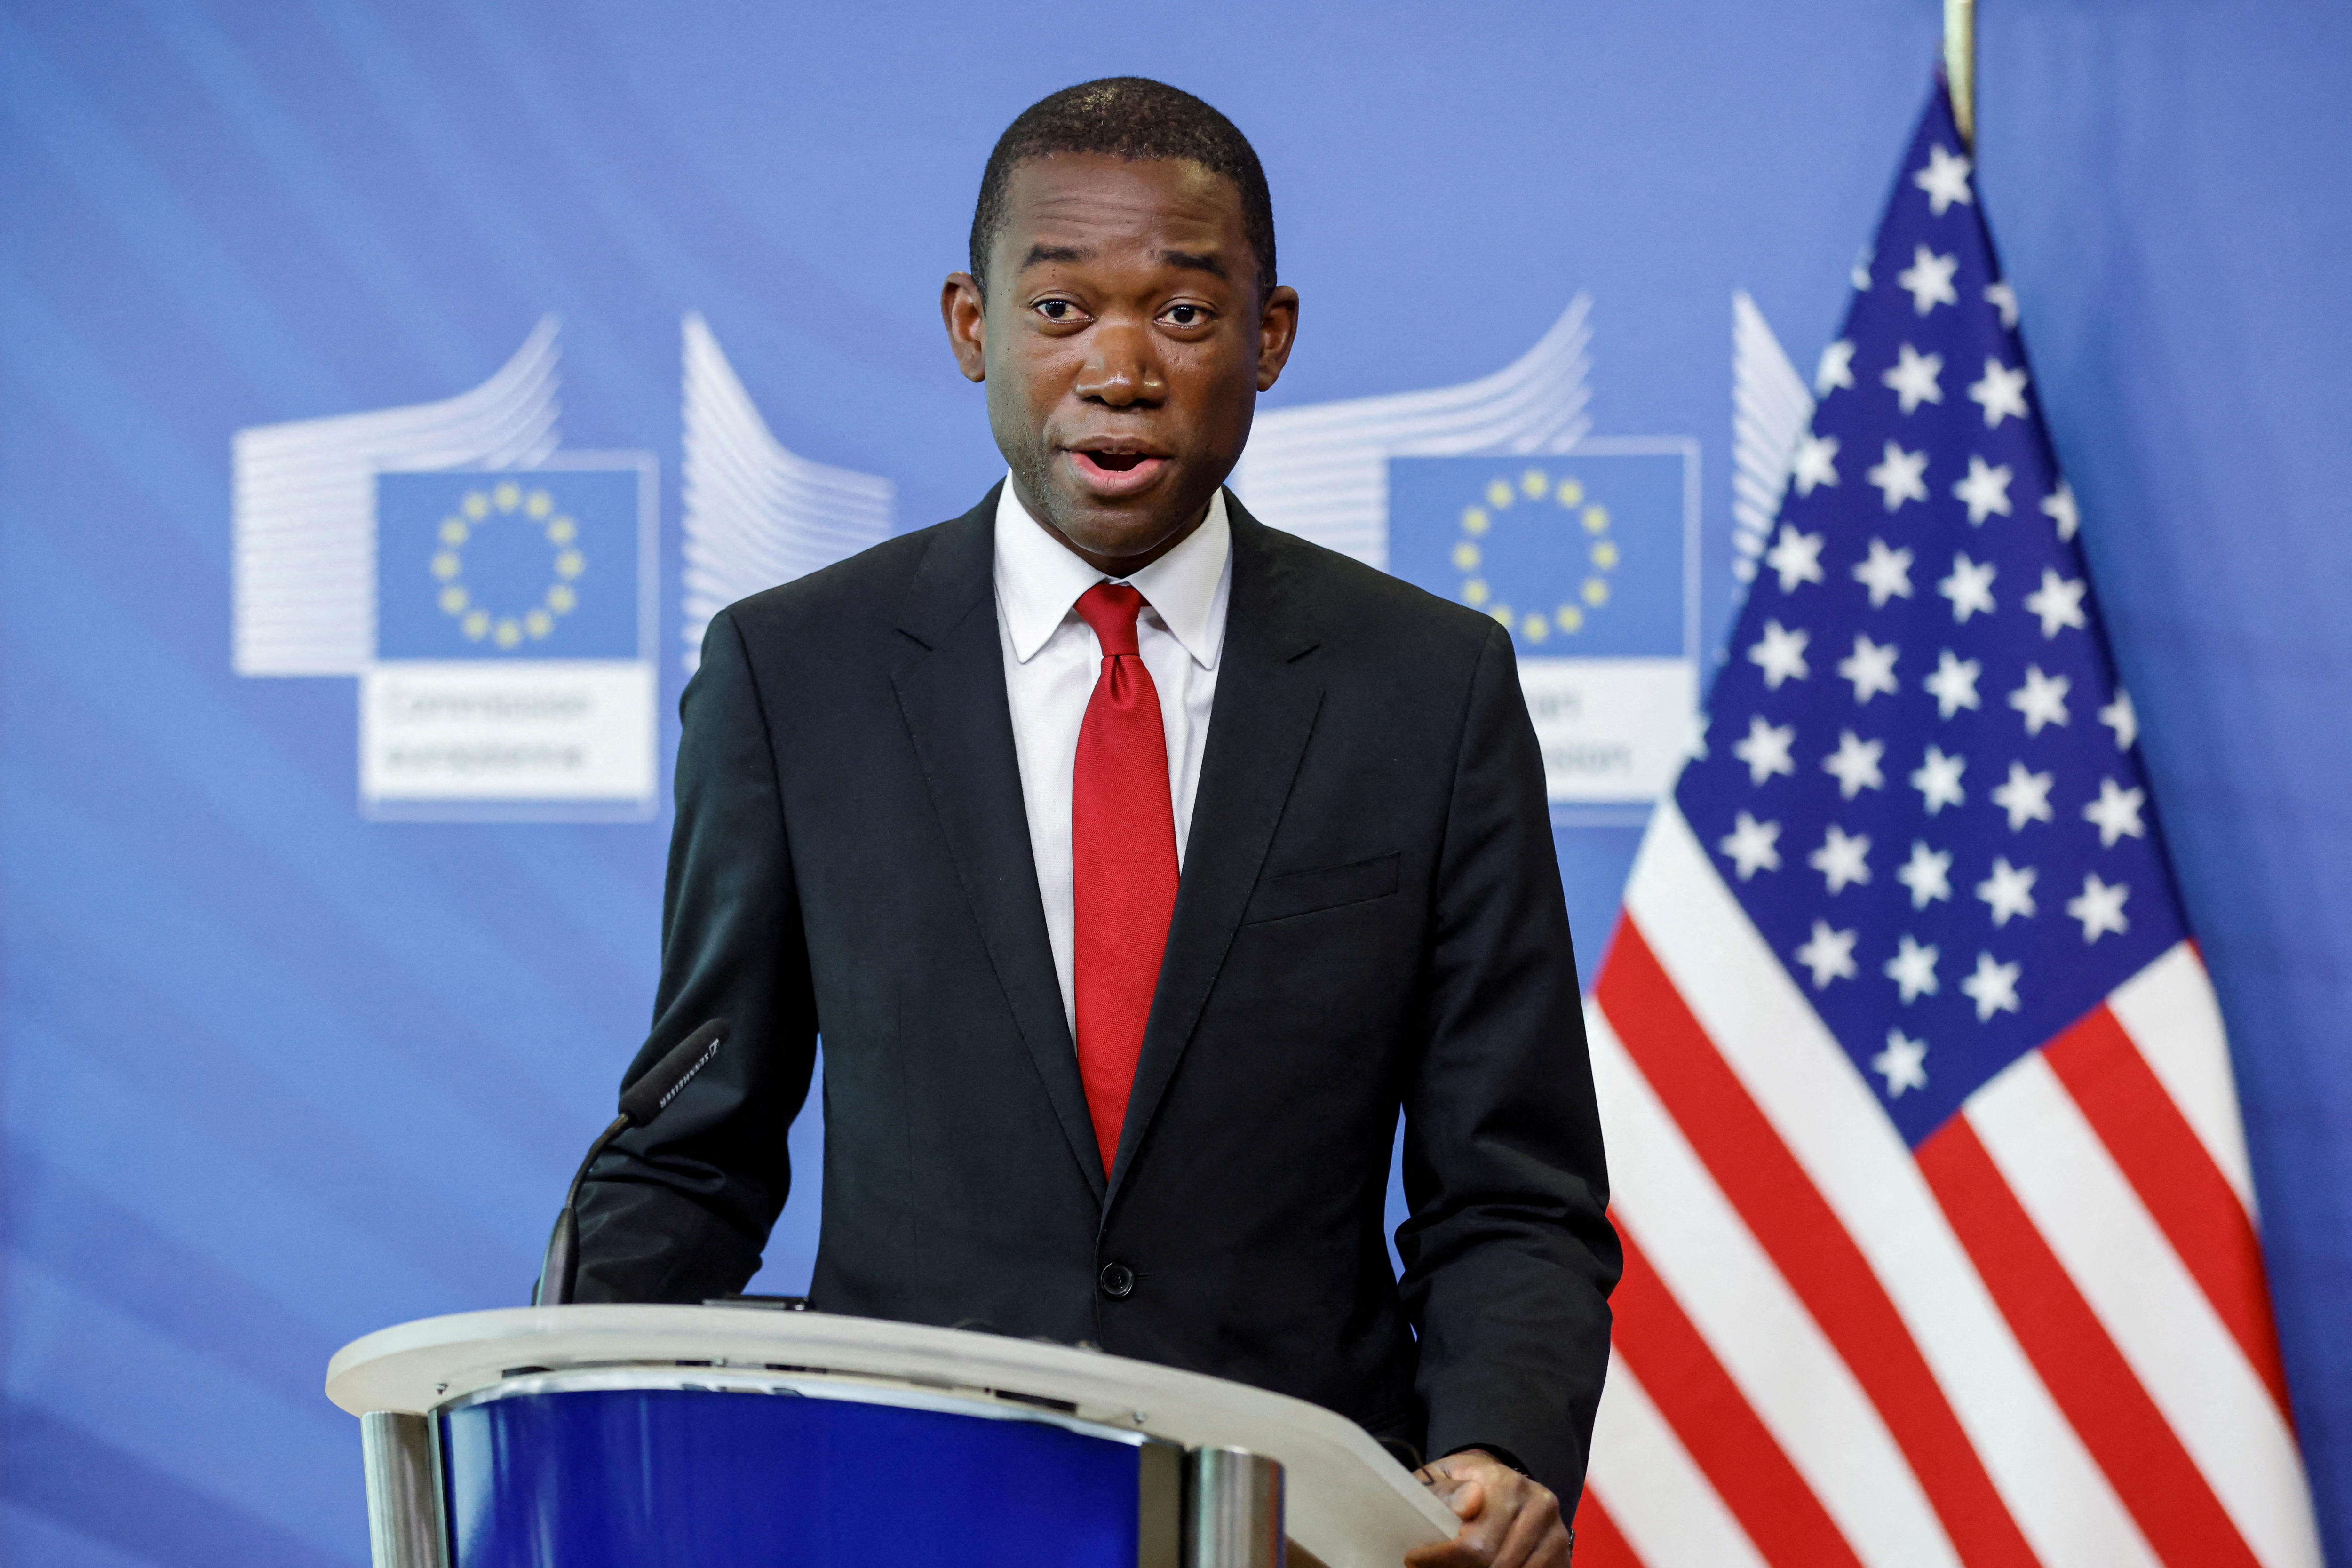 EU Commissioner McGuinness and U.S. Deputy Secretary of the Treasury Adeyemo give a joint news conference, in Brussels